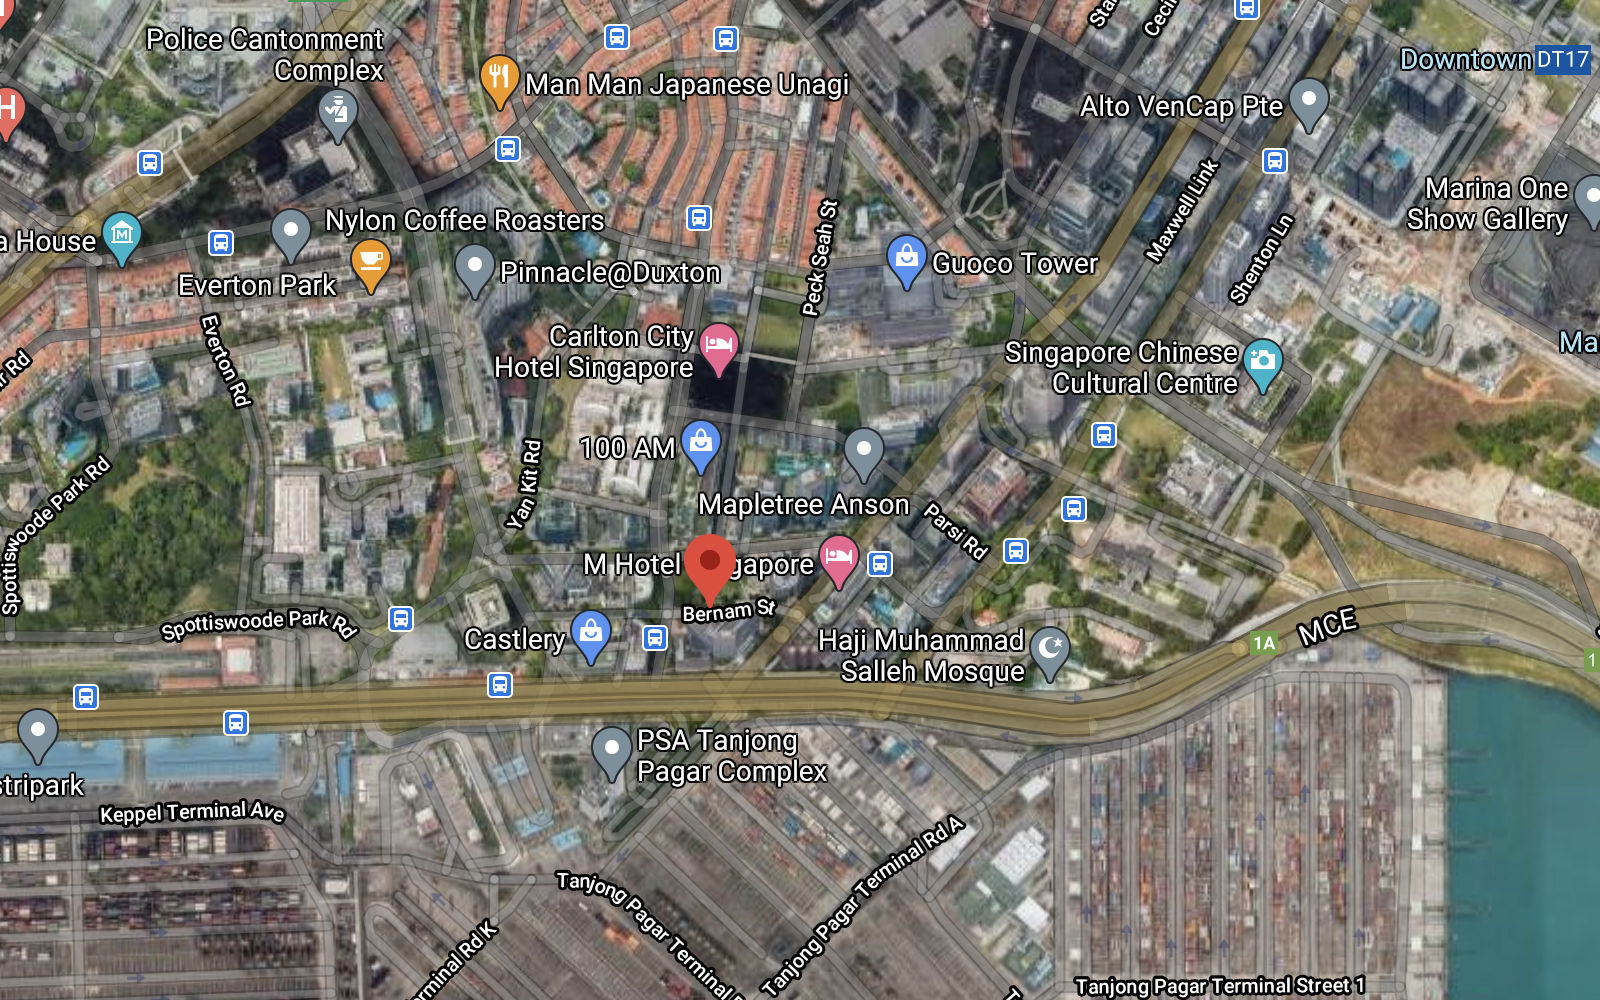 The Newport Residences Location Plan from Google Maps